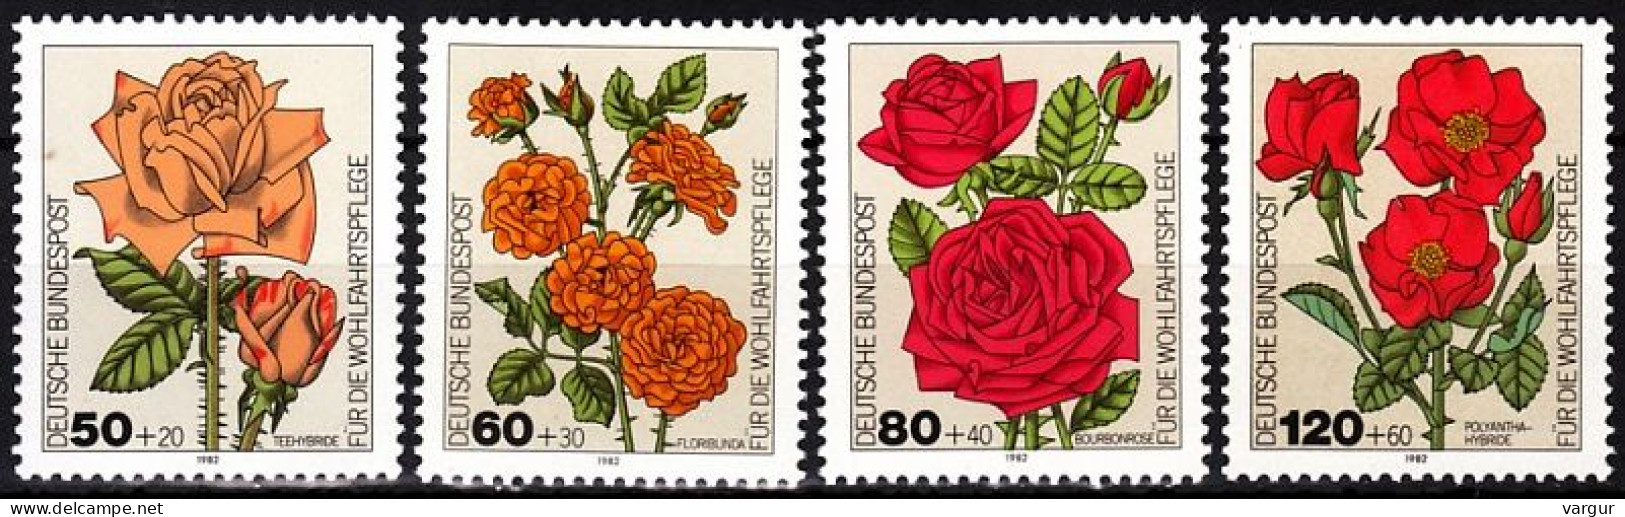 GERMANY FRG 1982 FLORA Plants Flowers: Garden Roses. Charity. Complete Set, MNH - Roses